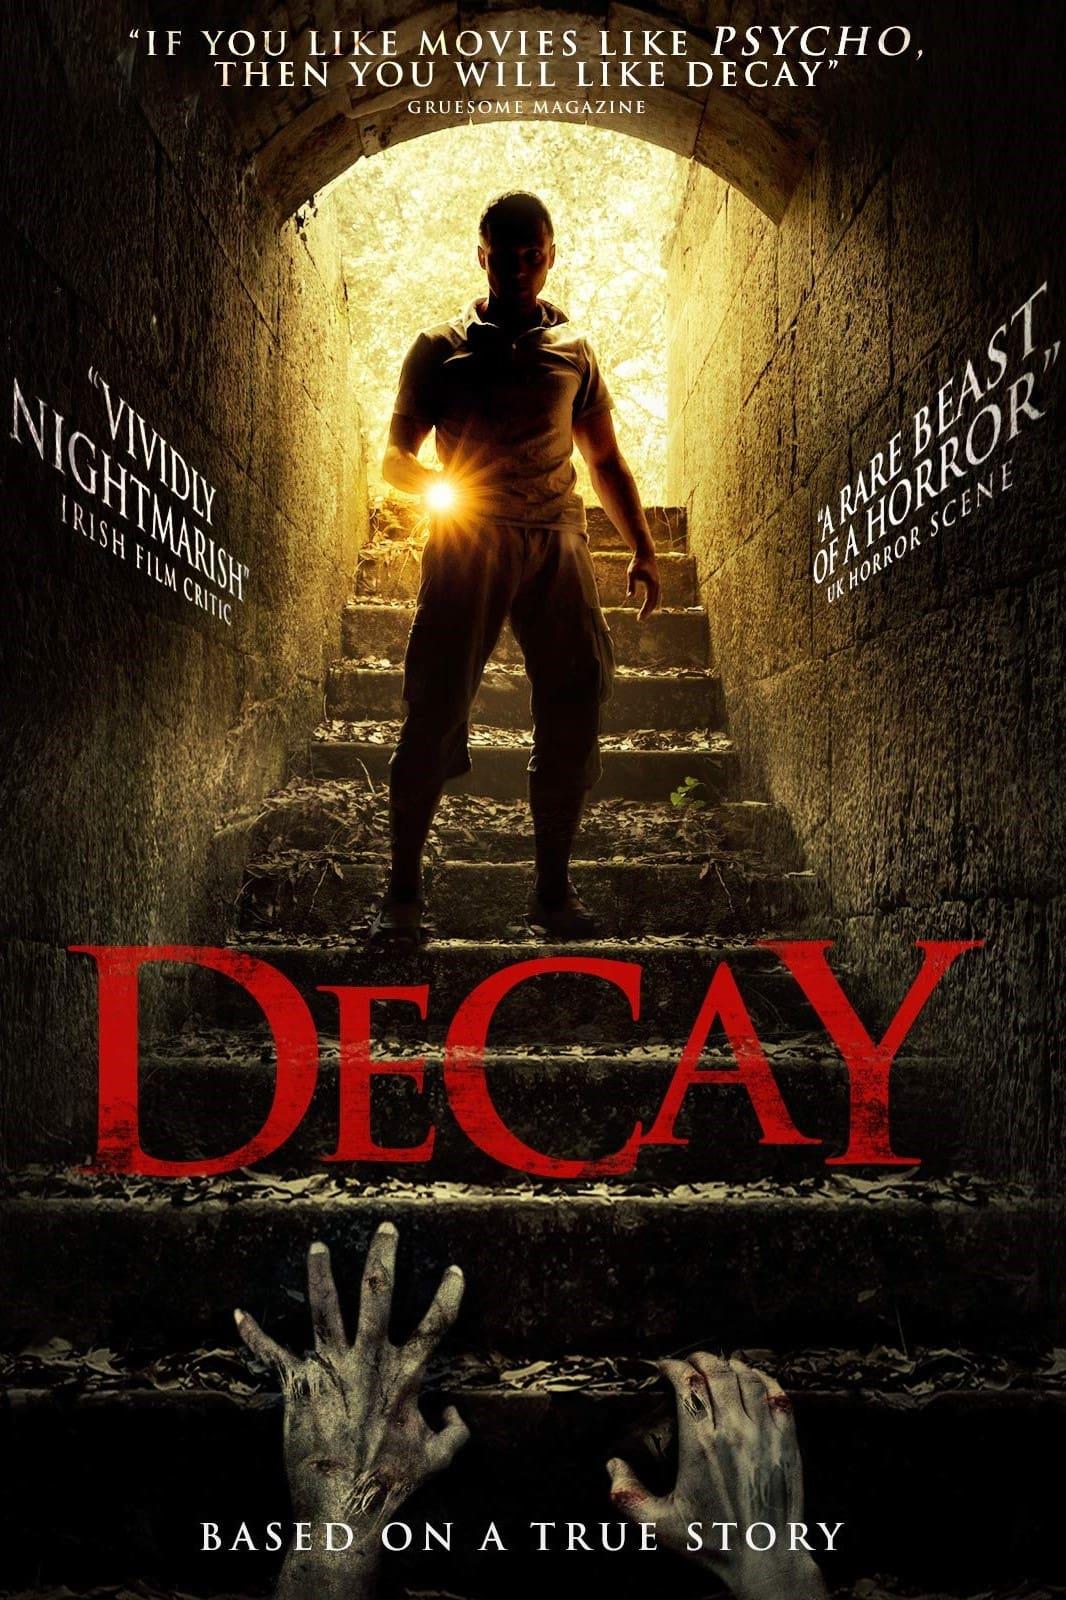 Decay poster